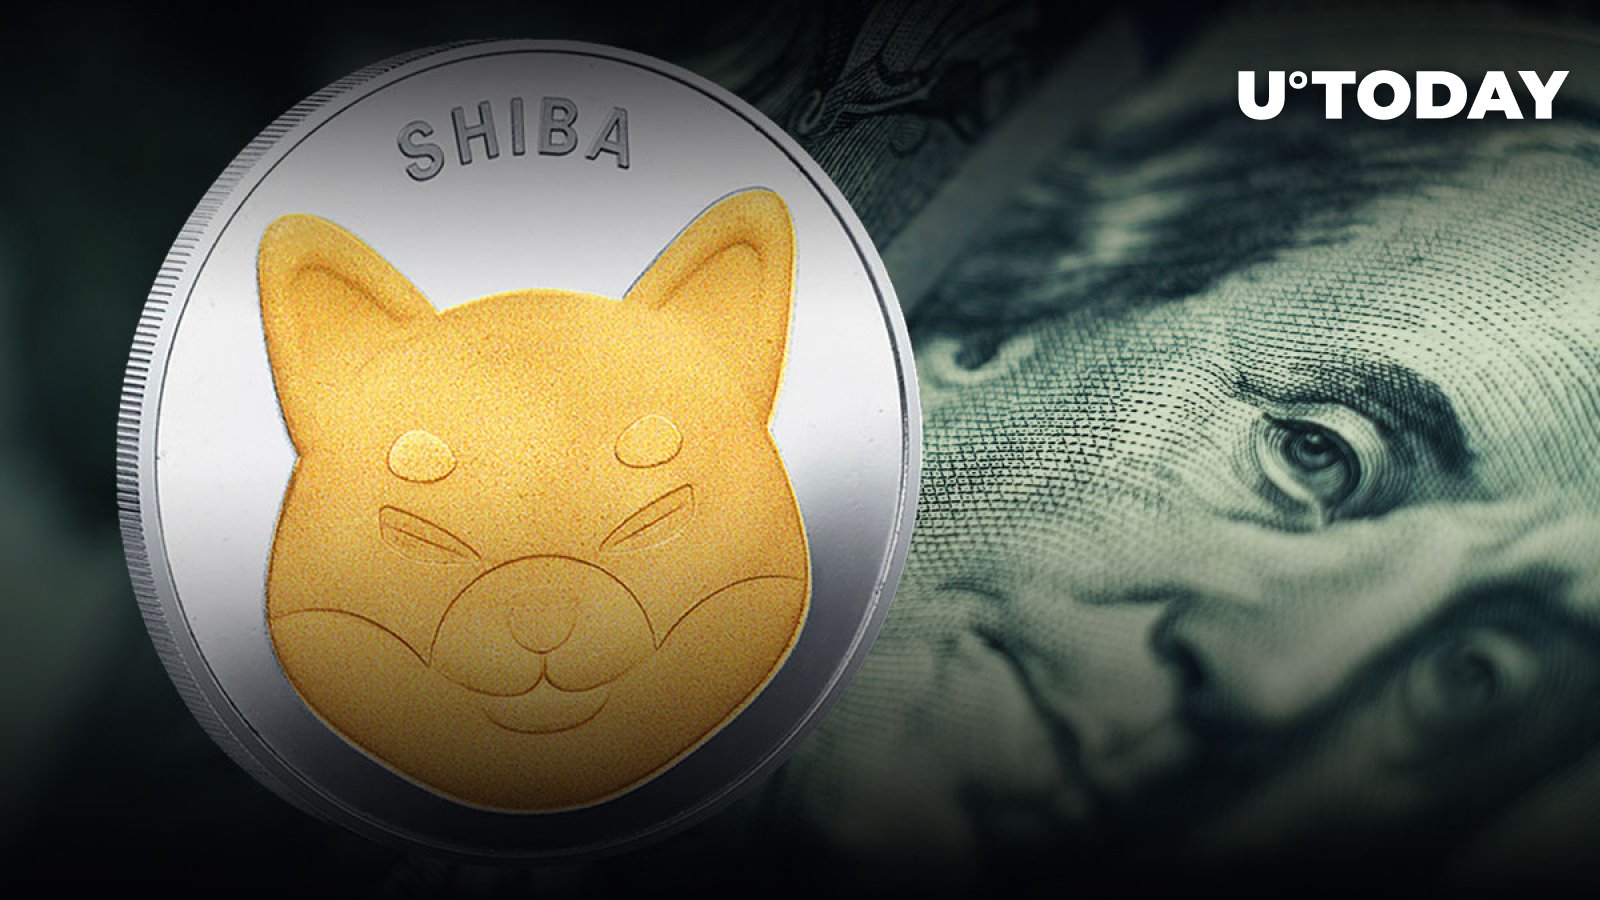 more-millionaire-shiba-inu-owners-are-emerging-data-shows